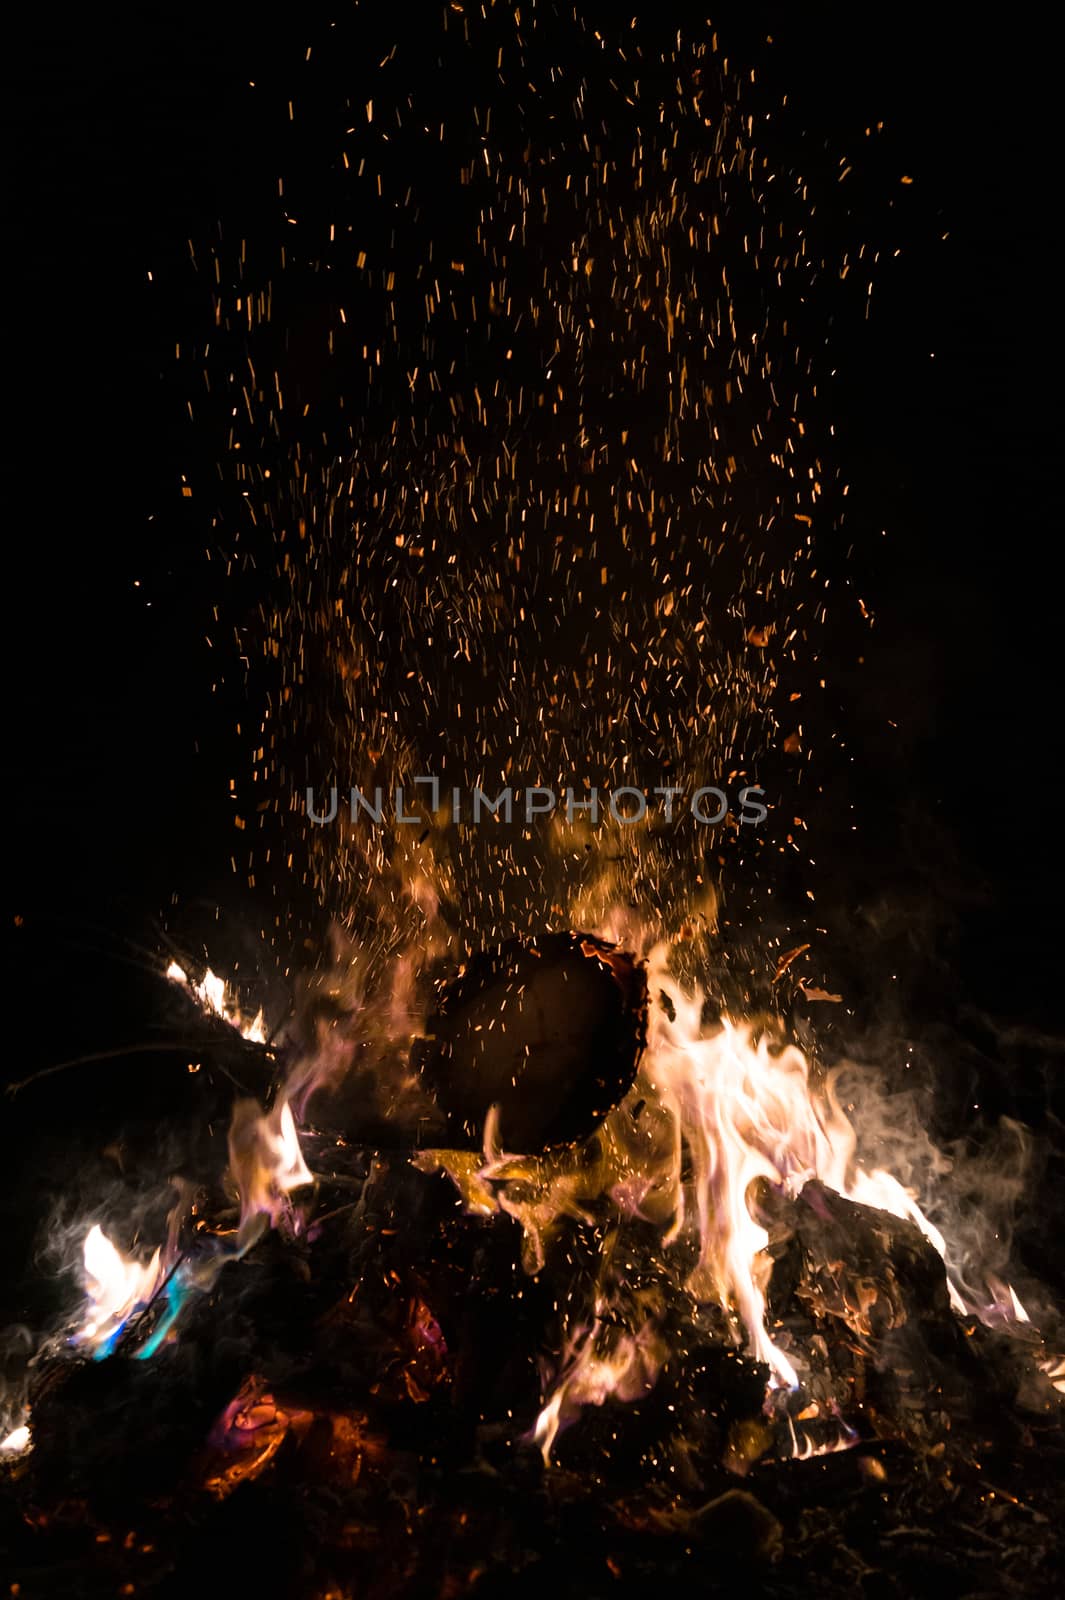 A low light underexposed photo of burning fire. by alexsdriver